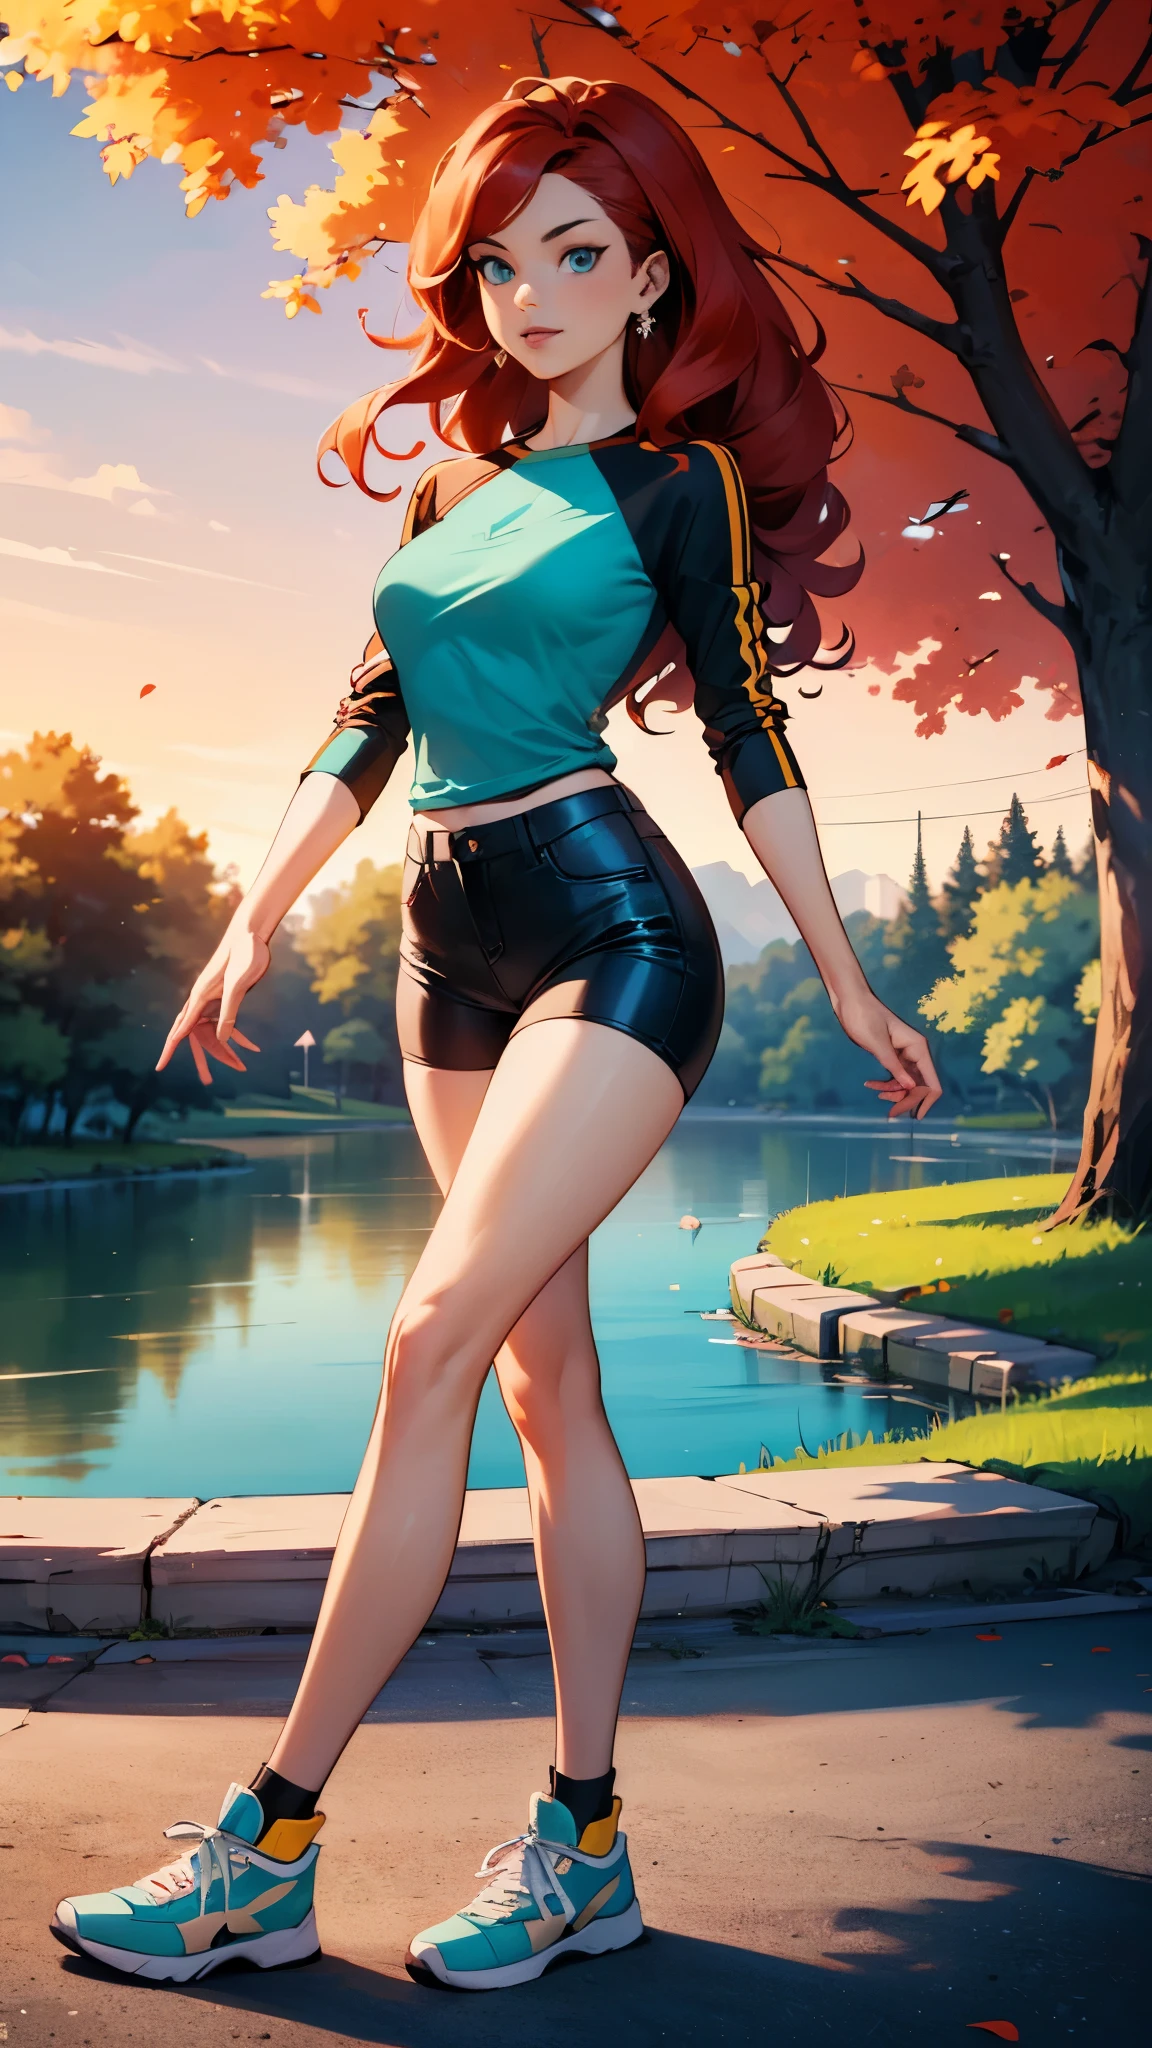 masterpiece, extremery magnificent view, perspective, extremery best quality, extremery detailed CG, 8k wallpaper, high resolution, highly detailed face, highly detailed eyes, perfect anatomy, super detailed skin, (dynamic angle, dynamic pose:1.2), outdoors, park, tree and pond, (portrait, legs focus, full body), (beautiful face, beautiful eyes, beautiful legs:1.3), 1 girl, solo, sonia, medium breasts, aqua eyes, slender, high quality eyes, beautiful eyes, bike shorts, 3/4 body view, green raglan shirt with phoenix logo, denim shorts, x-men logo, sneaker shoes, mid 30's, adult woman, curly red hair, subtle smile